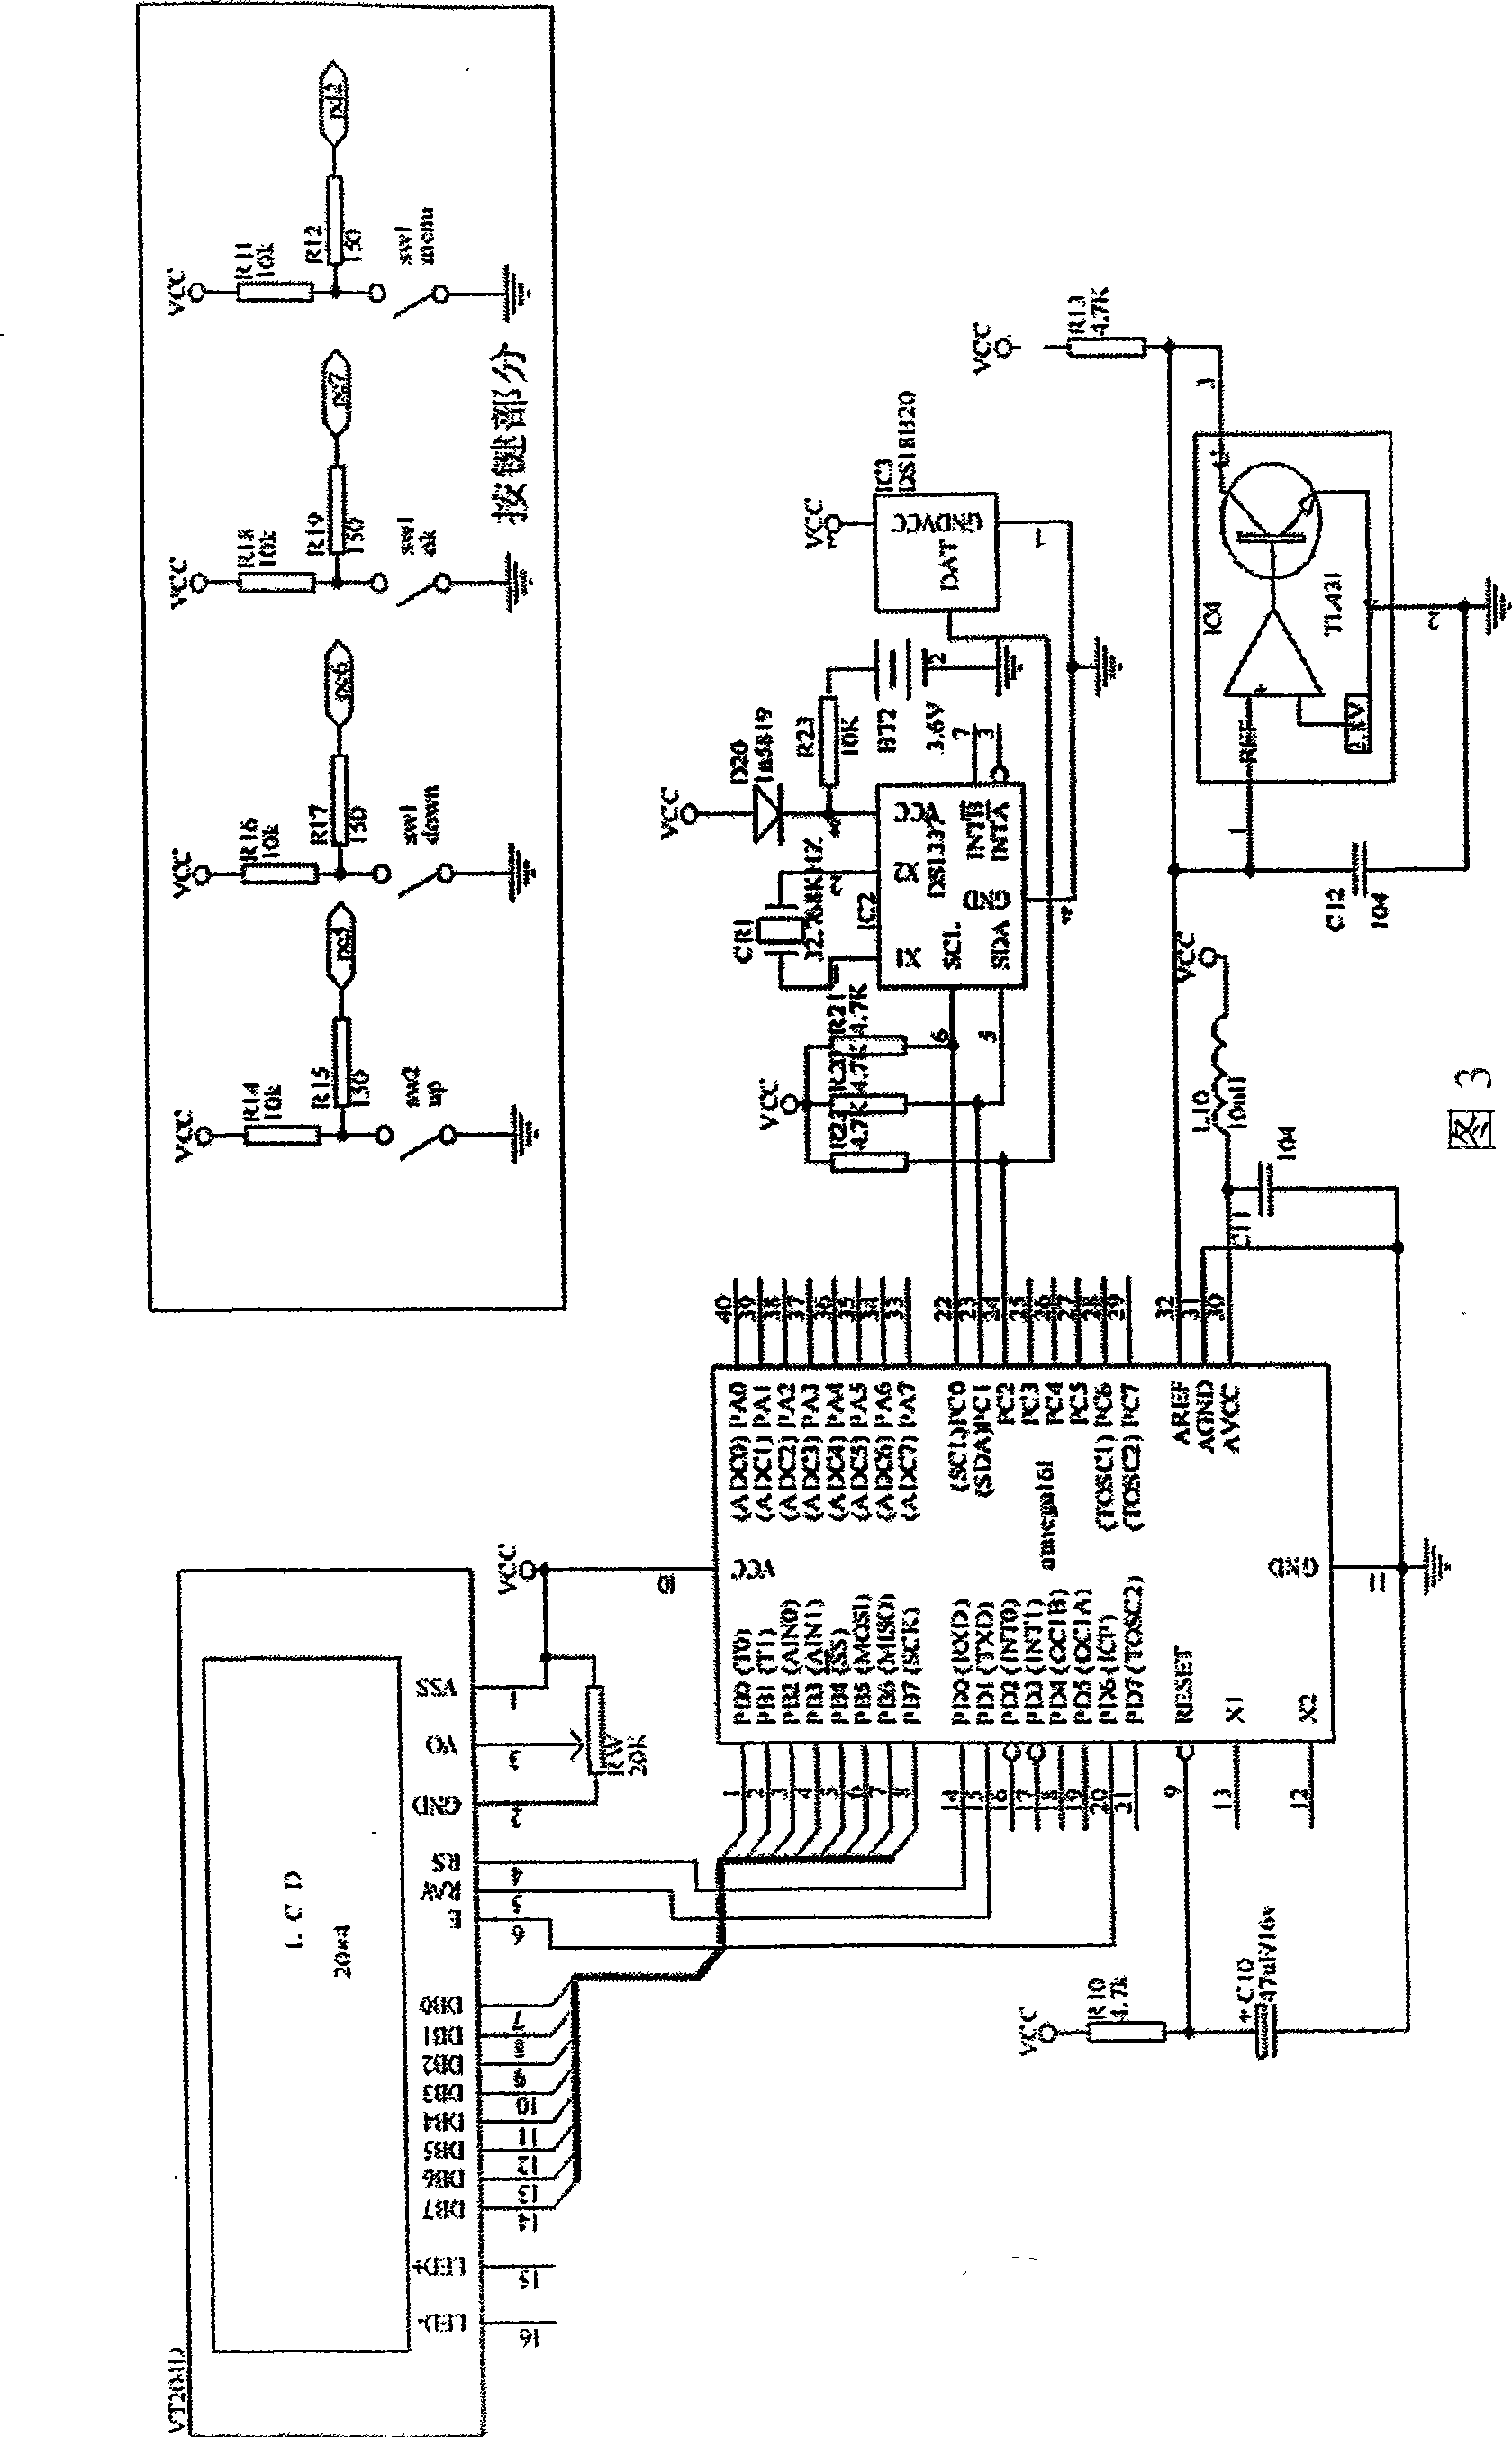 Control system of solar energy street lamp with display of self checked fault